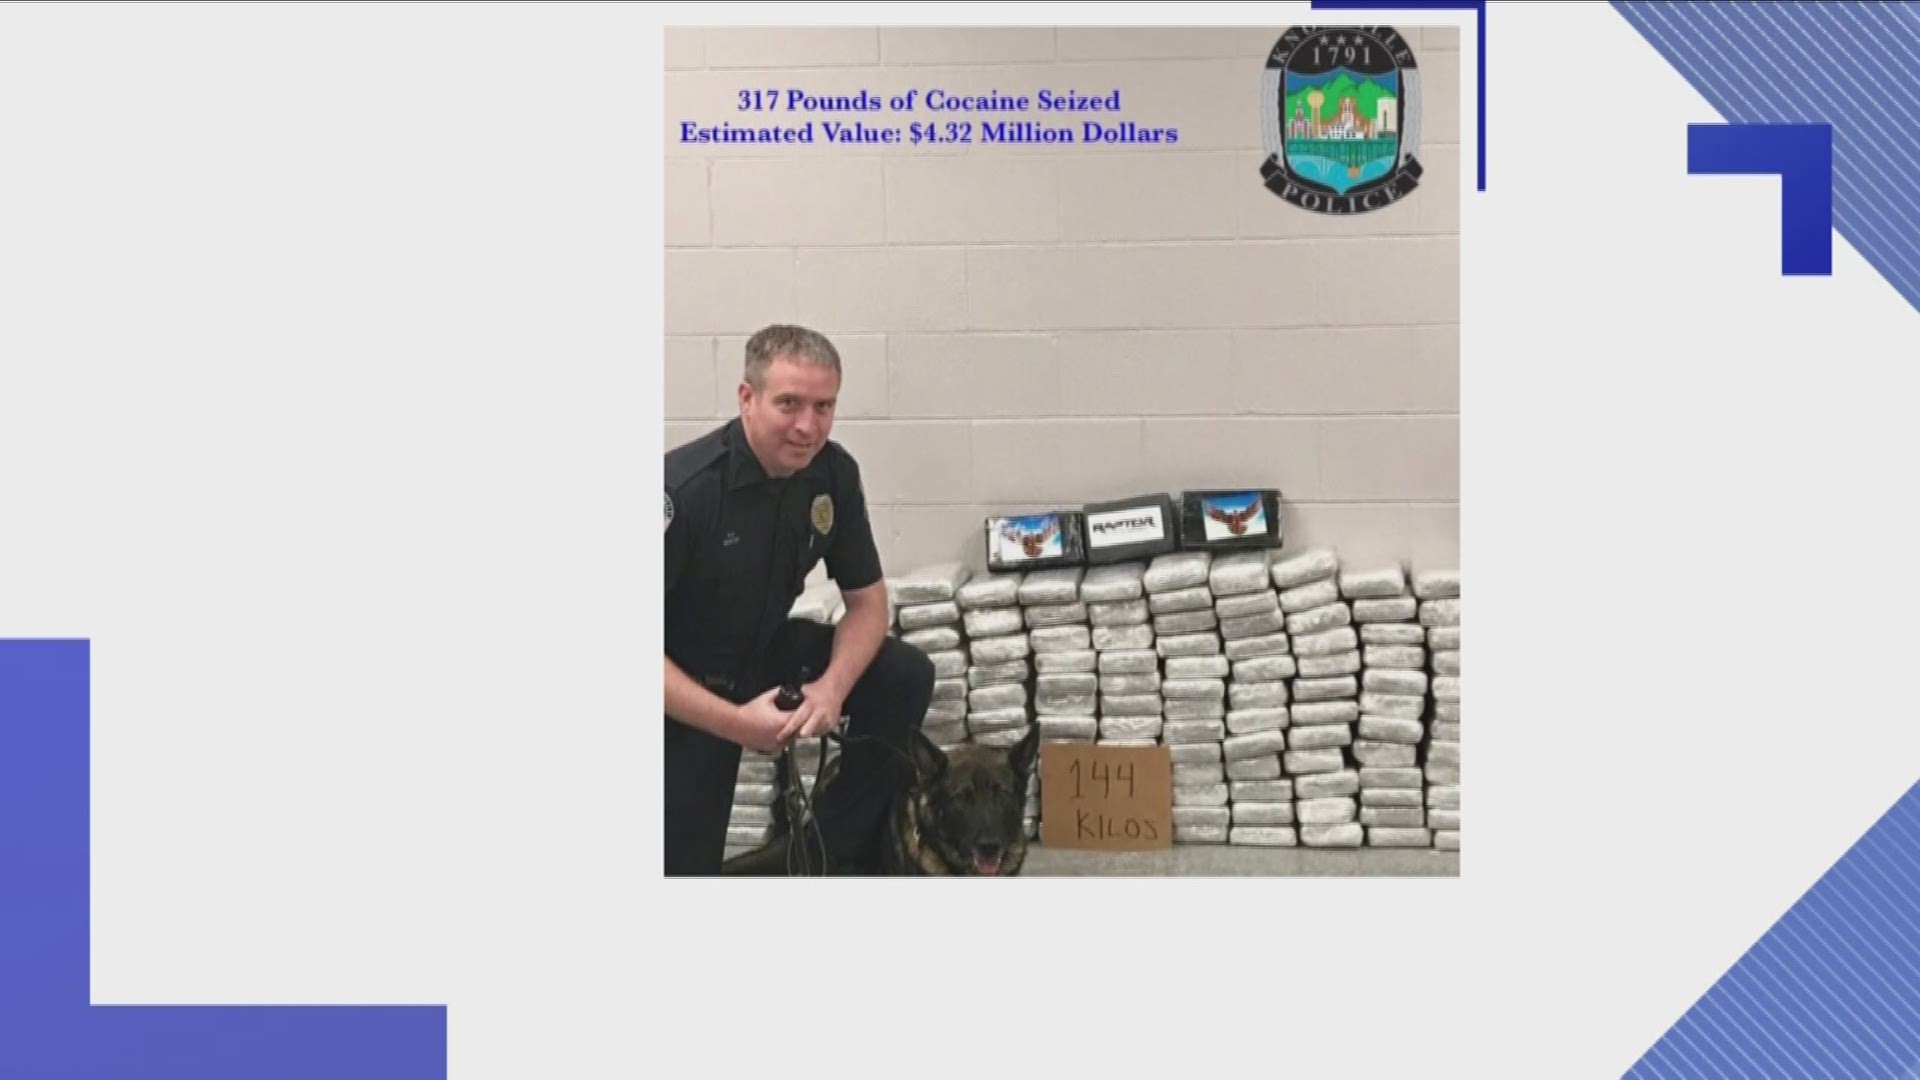 The Knoxville Police Department says it confiscated more than 300 pounds of cocaine from a West Knoxville business.